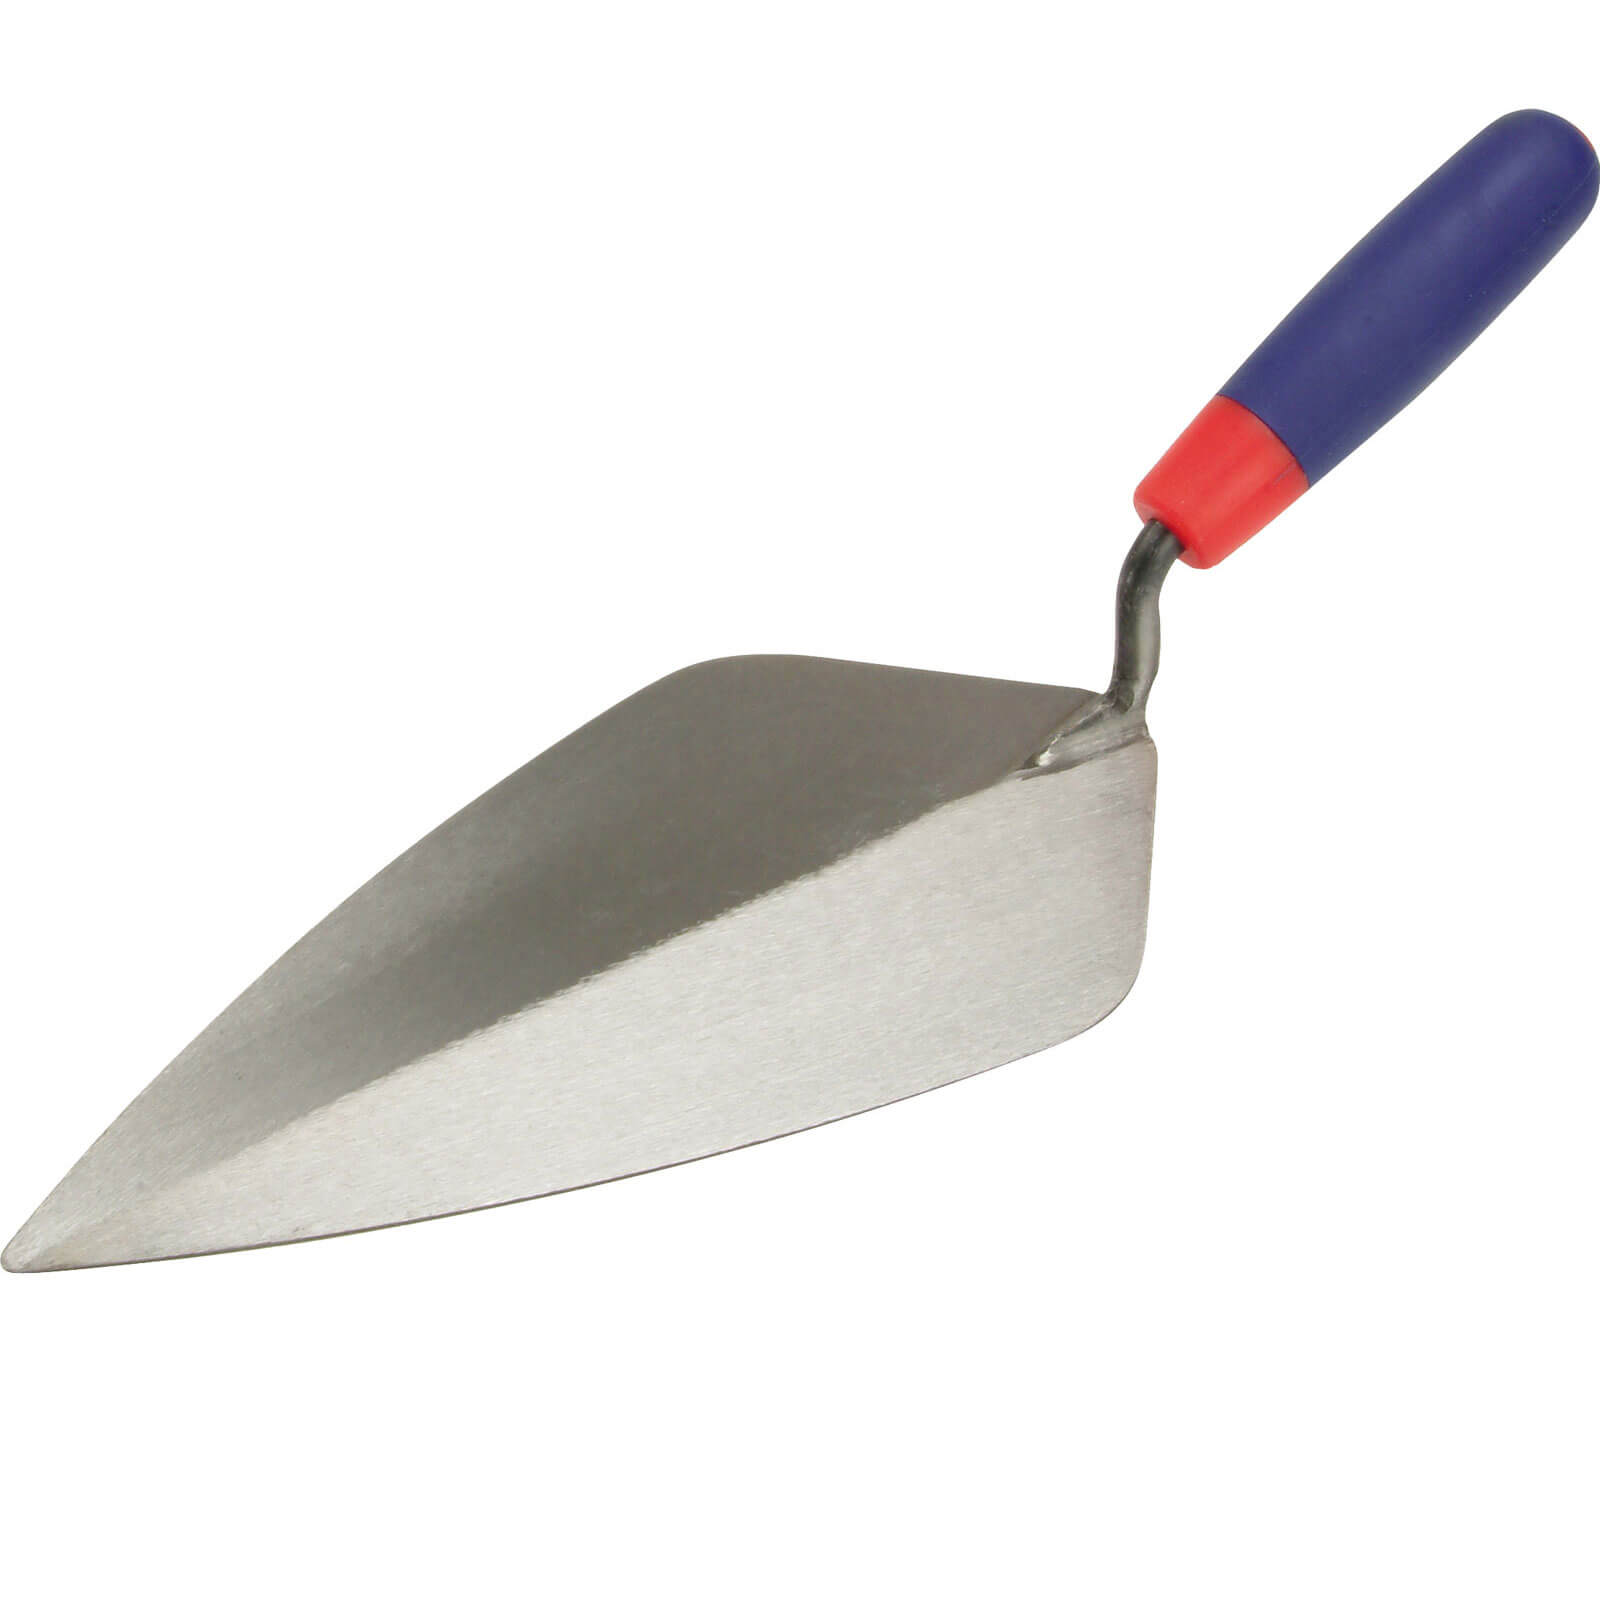 Photo of Rst London Pattern Soft Touch Brick Trowel 11